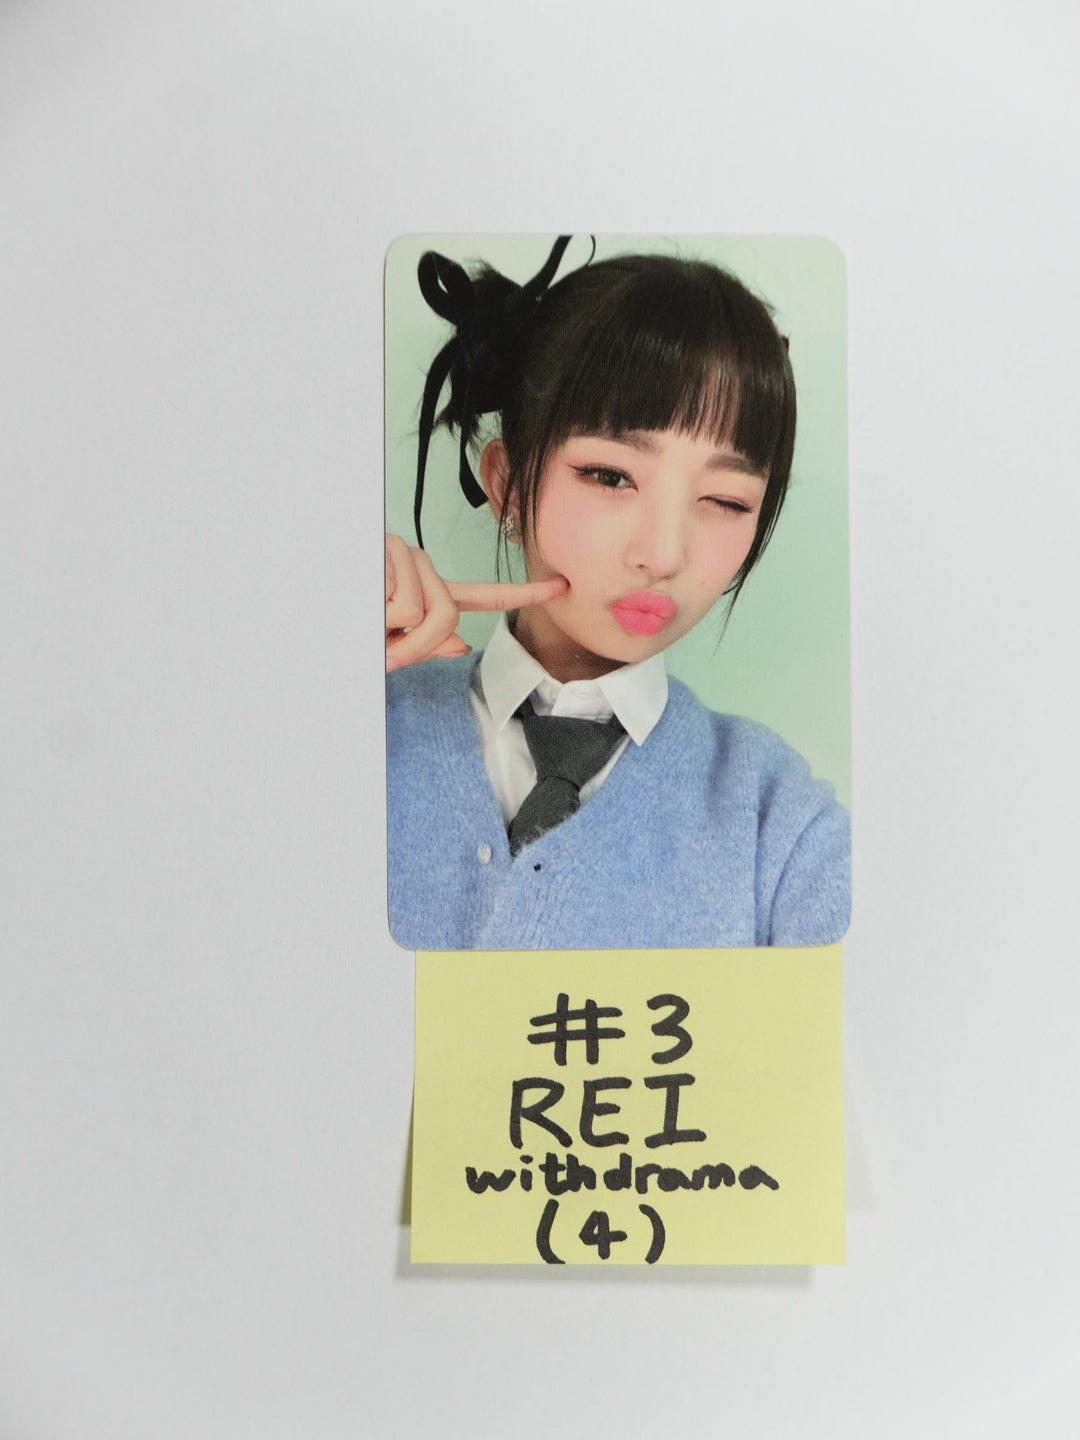 IVE 'ELEVEN' 1st Single - Withdrama Fansign Event Photocard